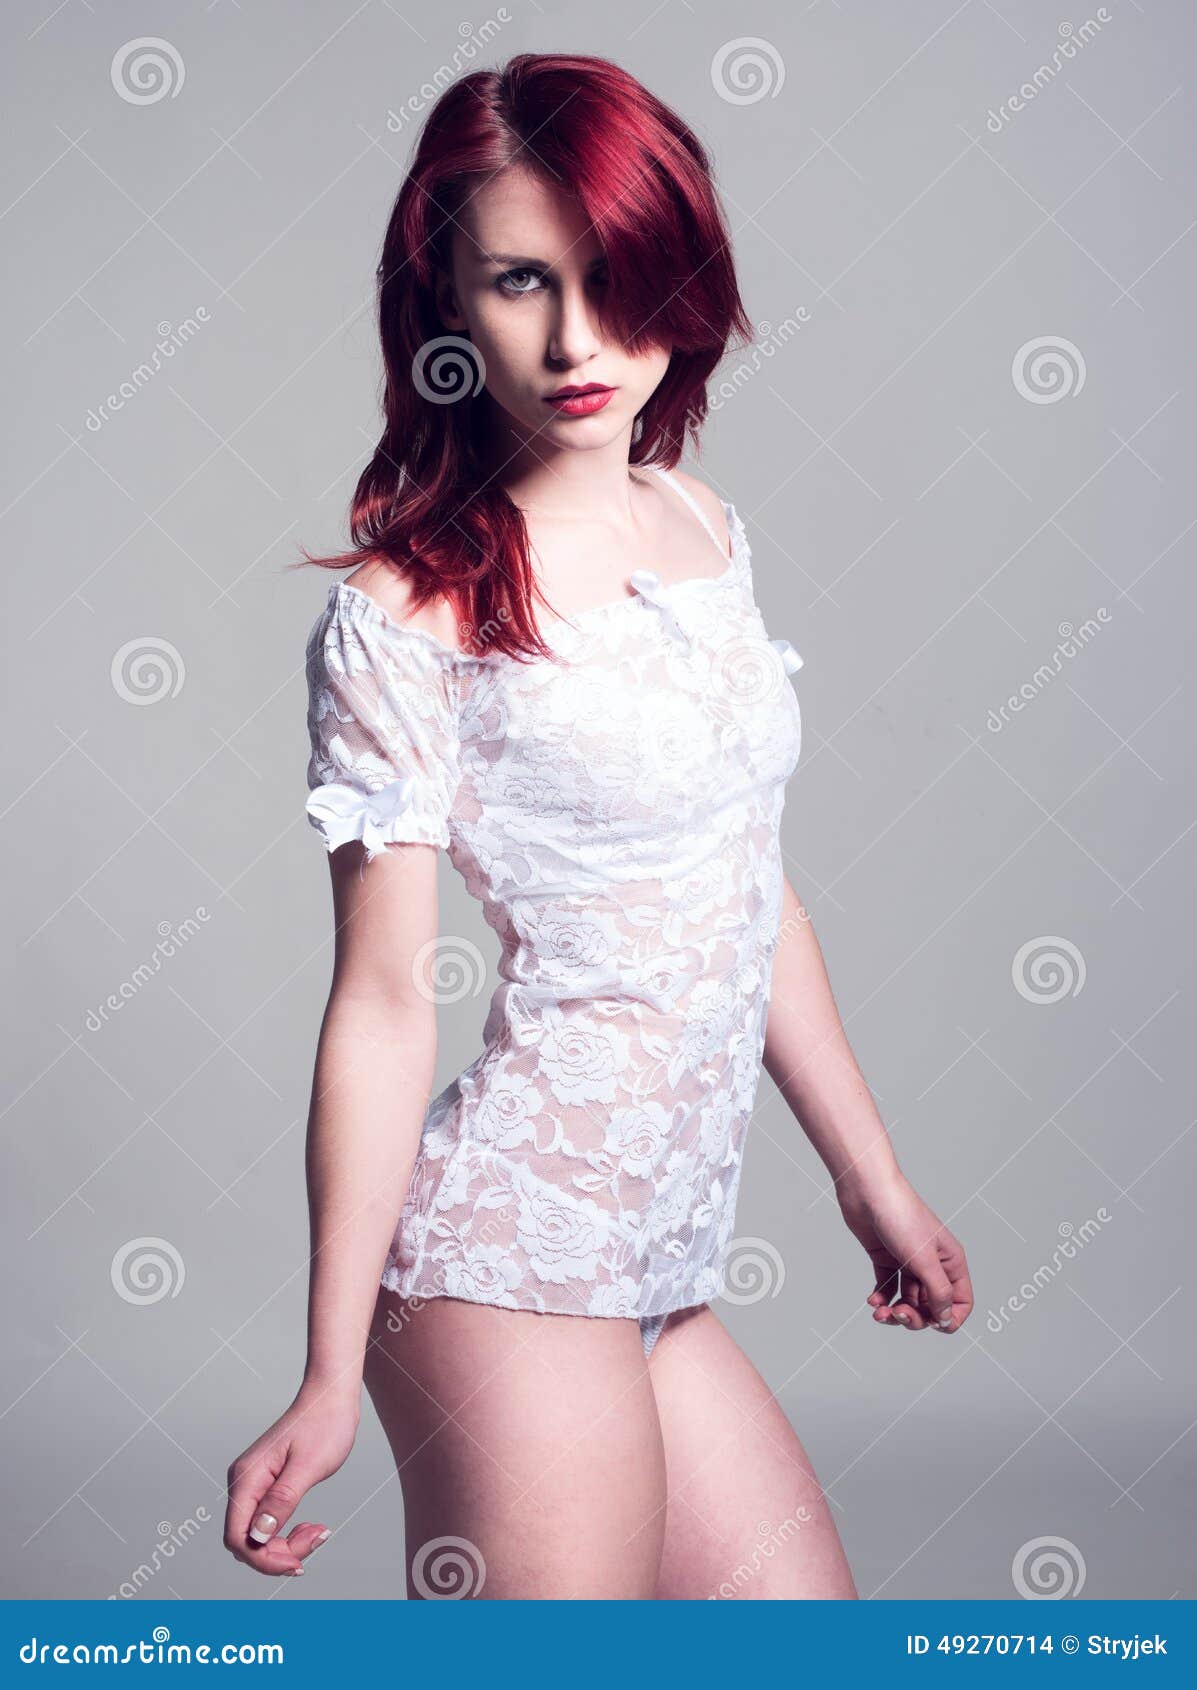 https://thumbs.dreamstime.com/z/woman-see-white-shirt-looking-camera-portrait-seductive-young-burgundy-hair-wearing-isolated-gray-49270714.jpg